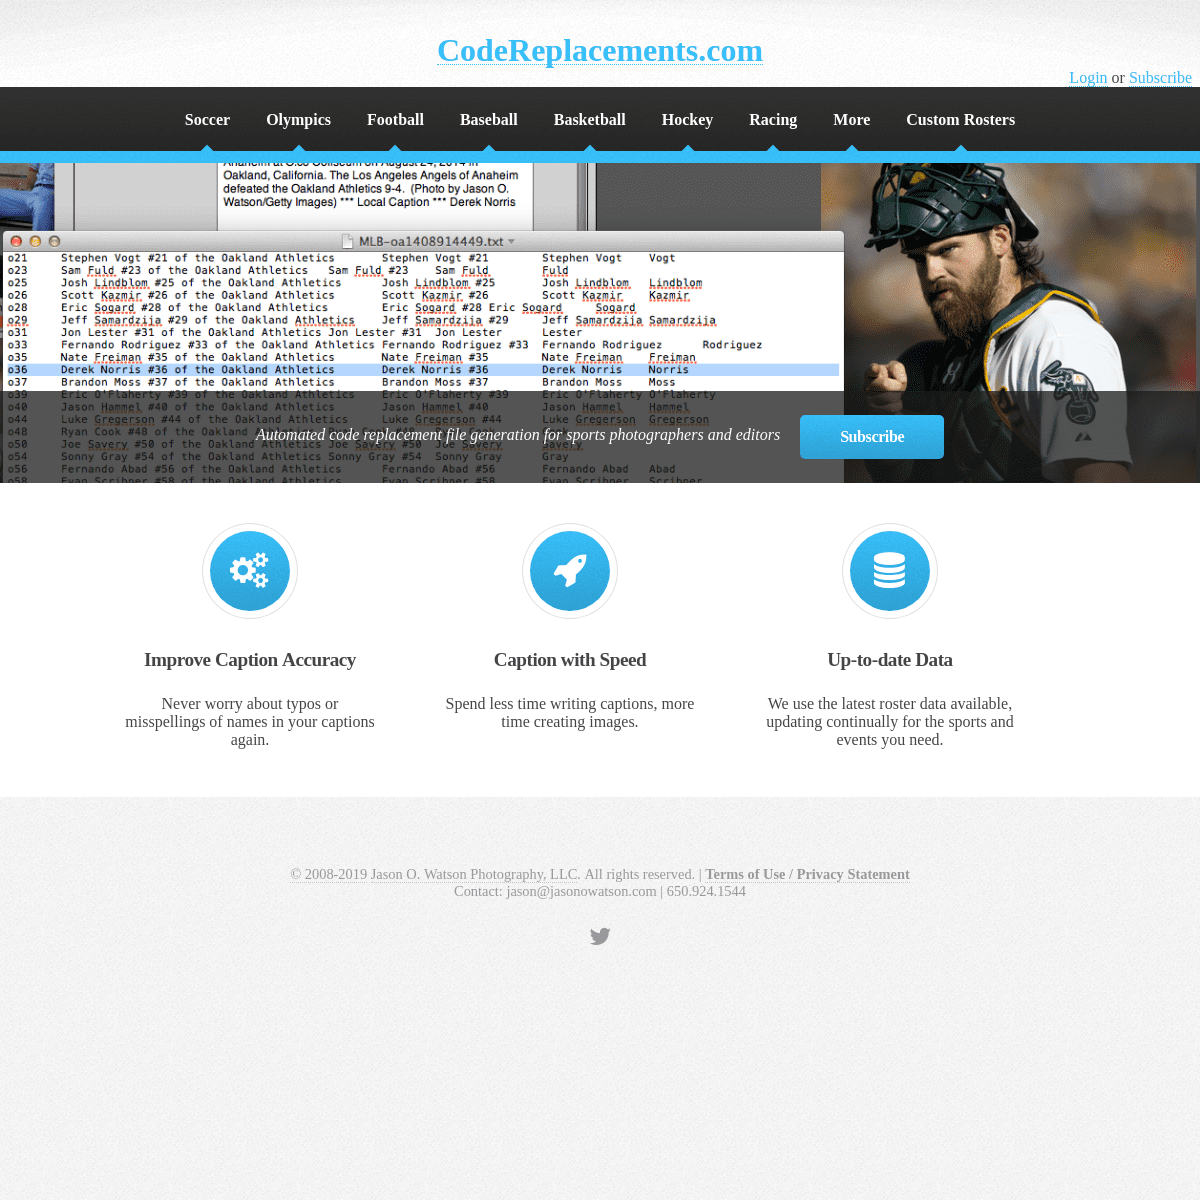 CodeReplacements.com - Automated code replacement file generation for sports photographers and editors